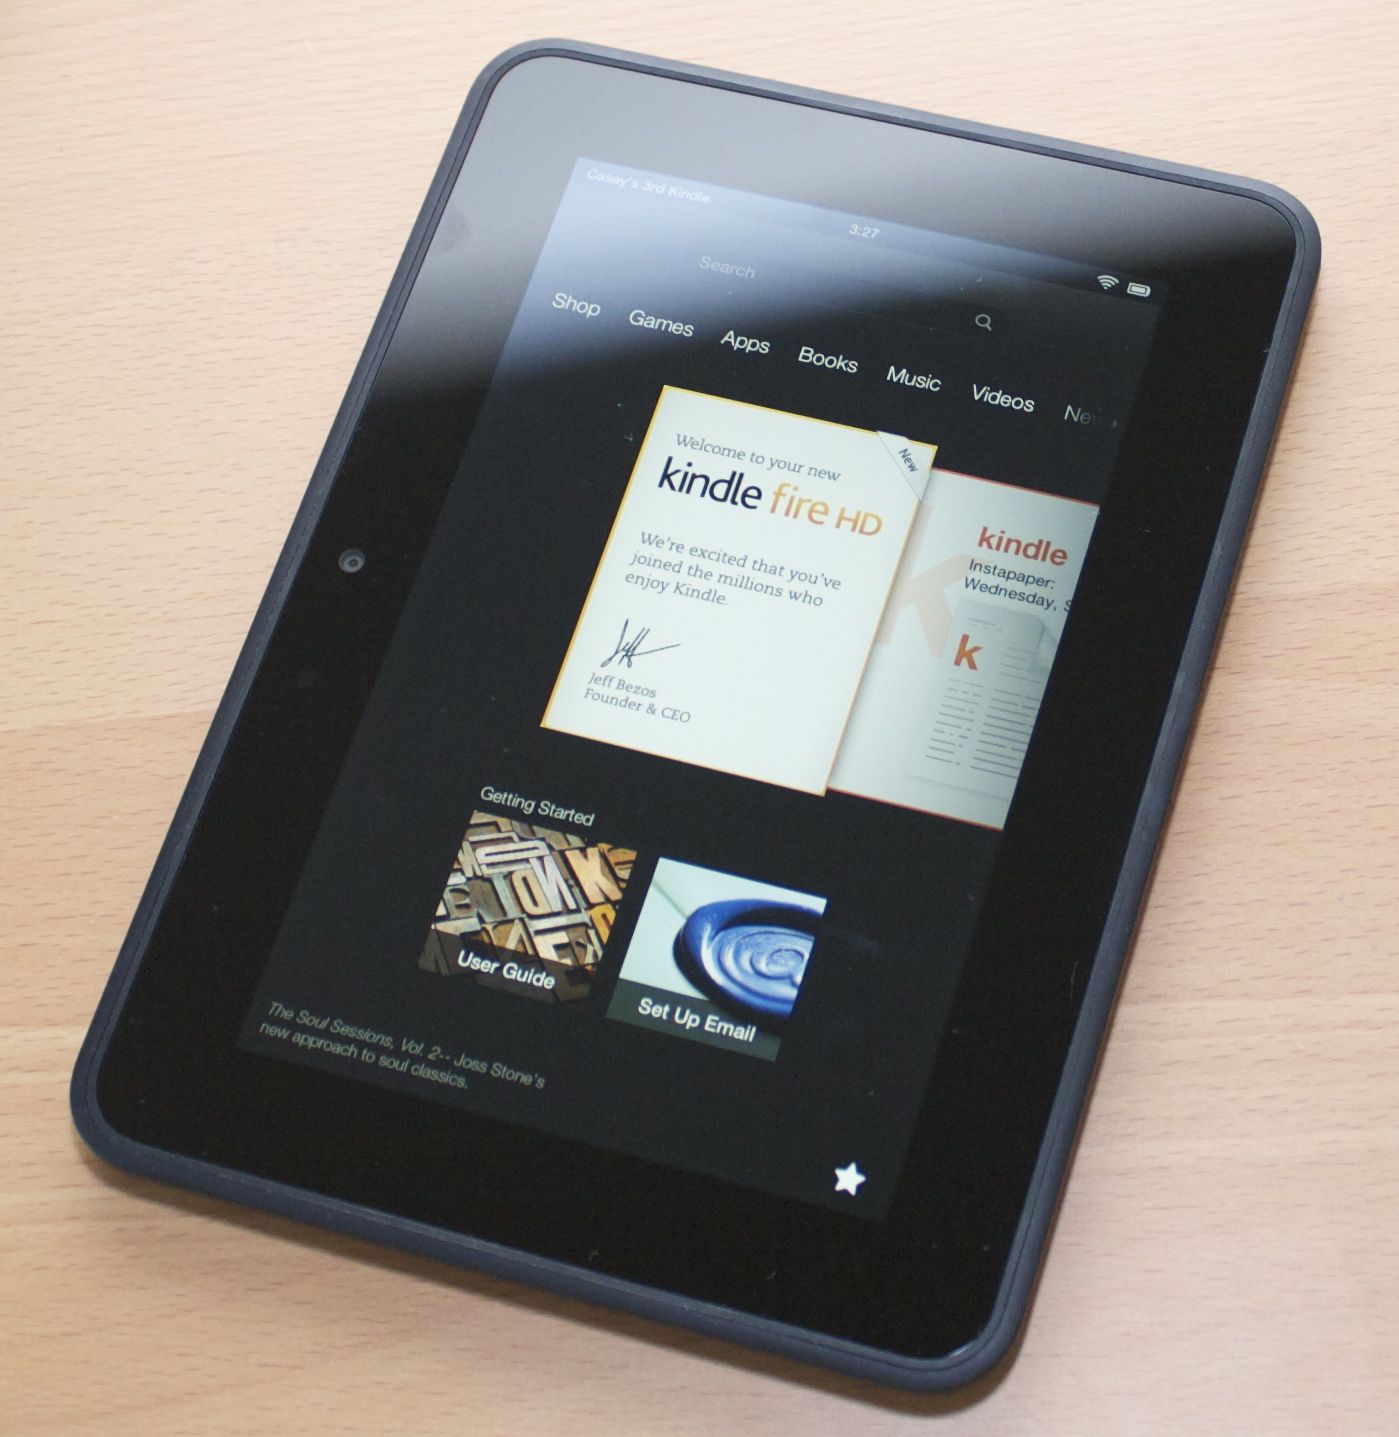 What Games Can You Get On A Kindle Fire Hd